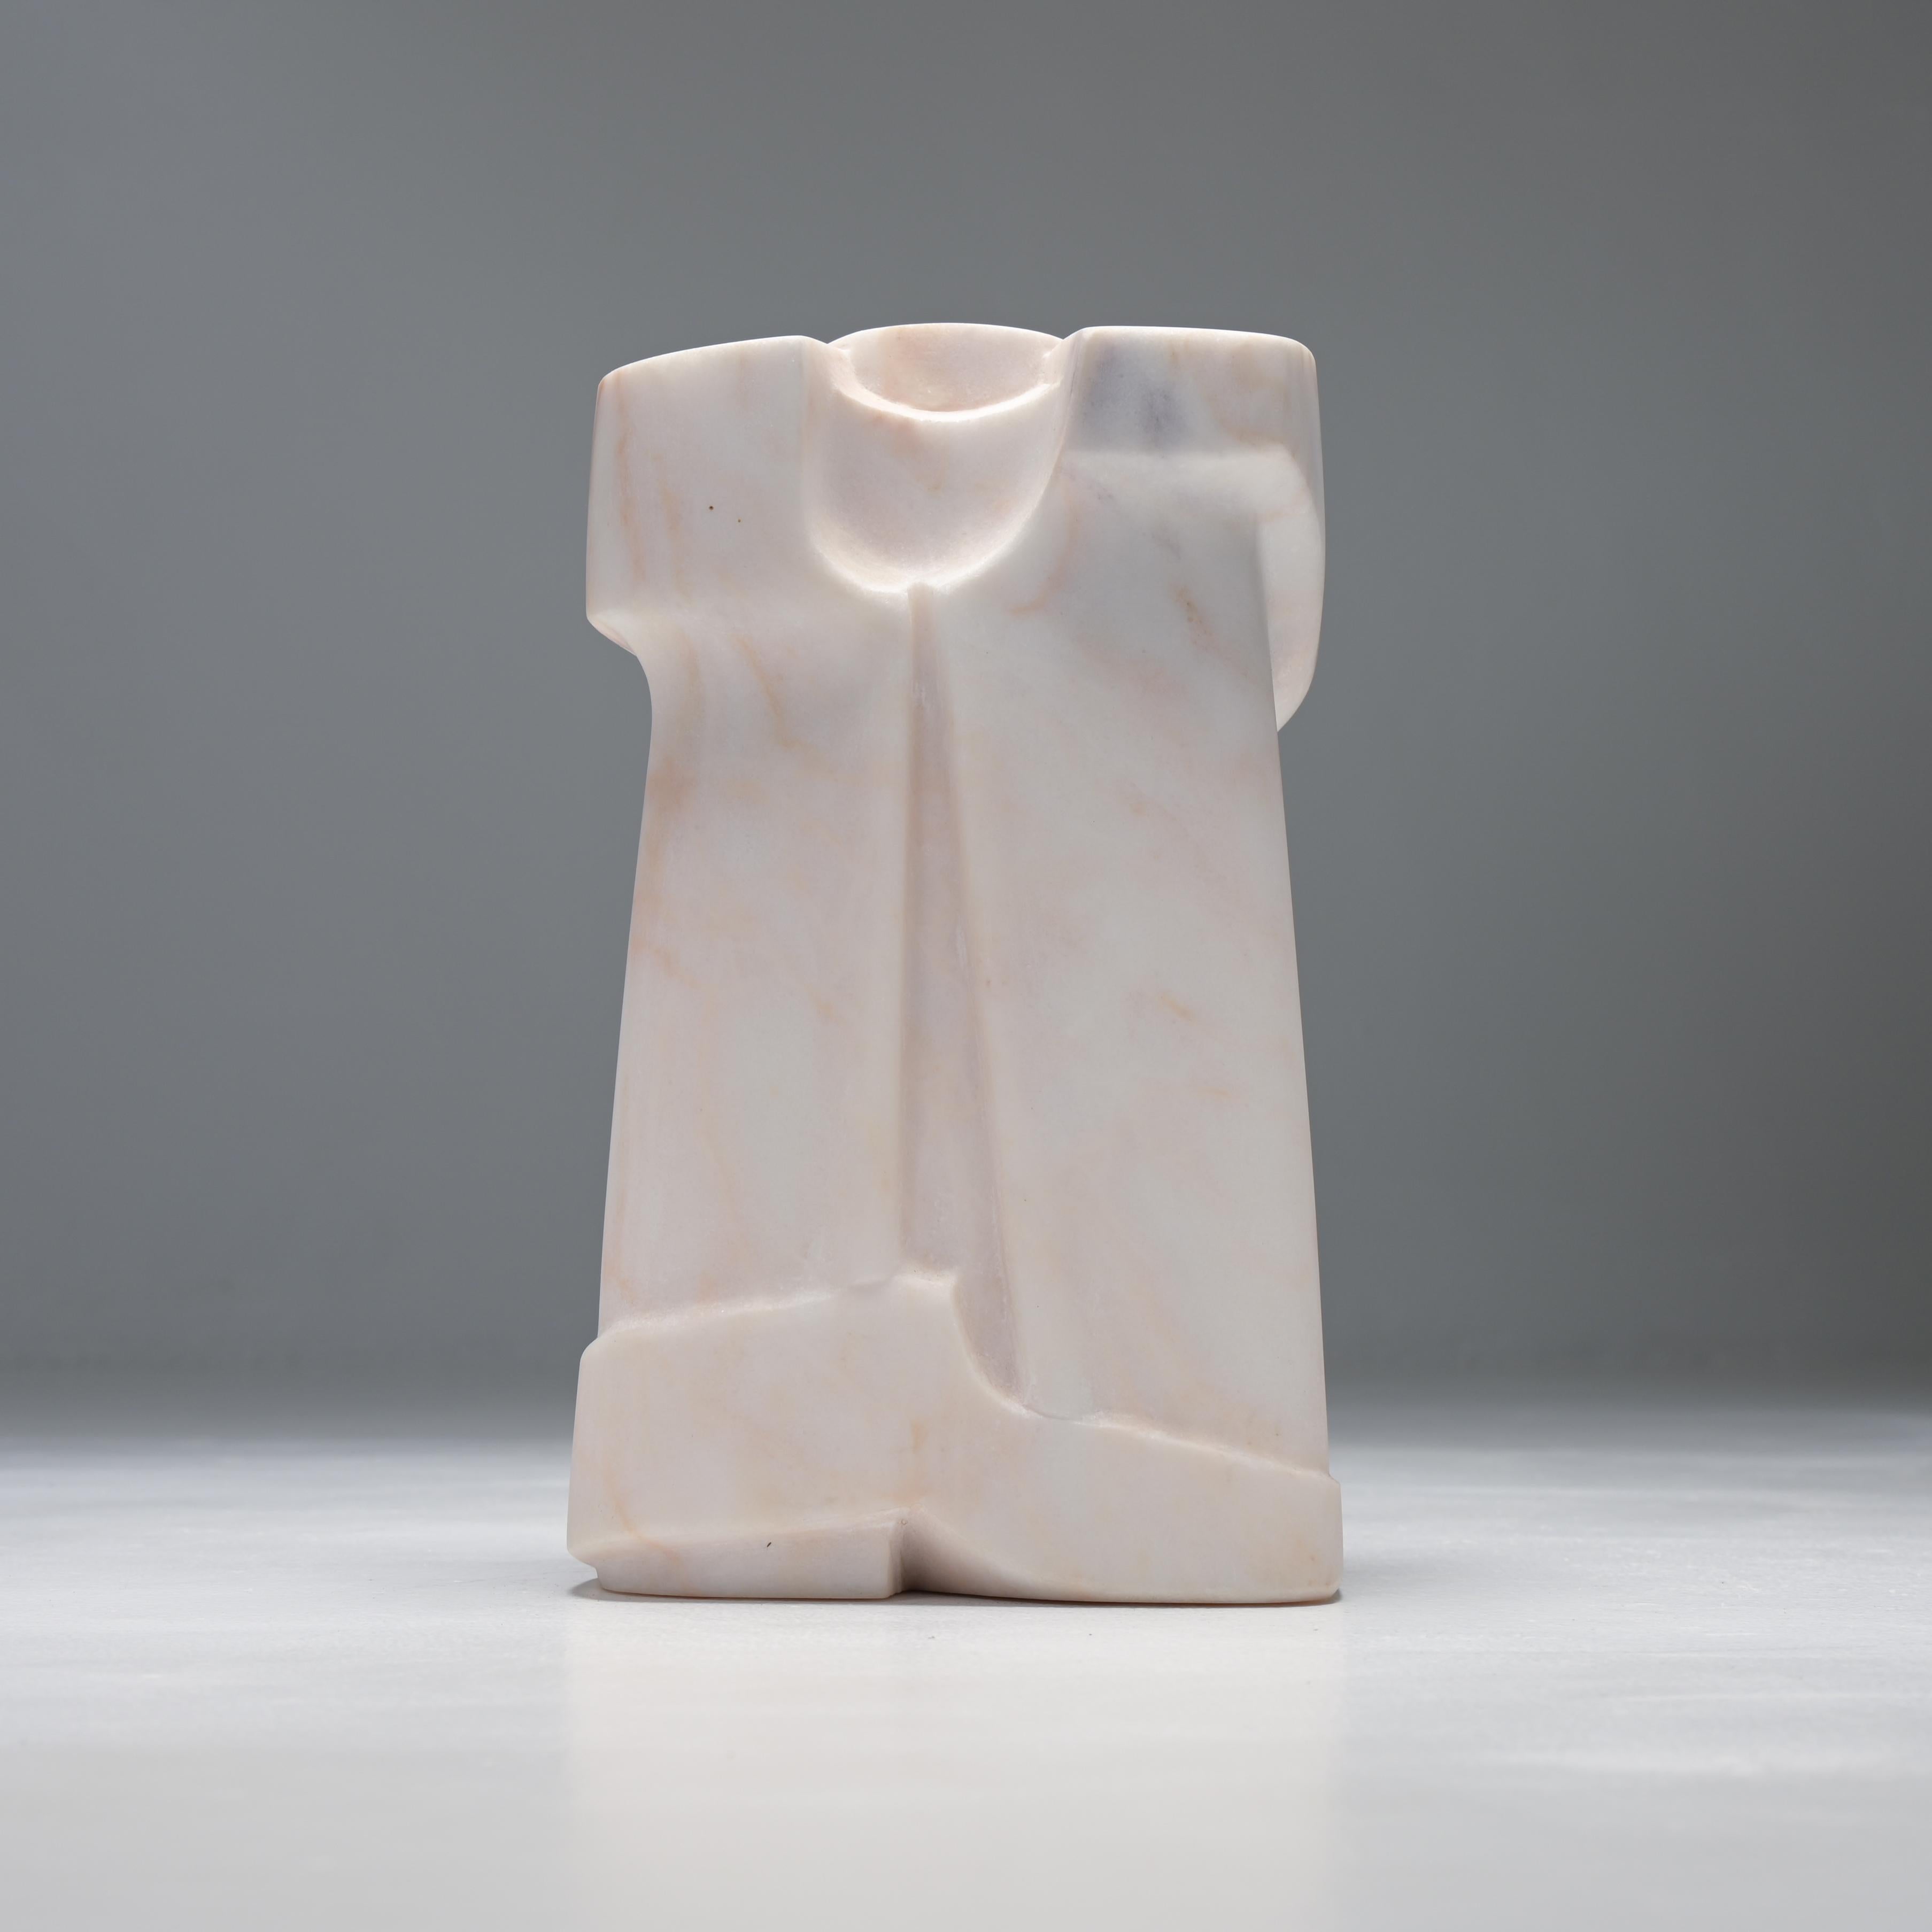 This abstract sculpture in Portuguese marble was sculpted ‘en taille directe’ by the Belgian artist Jan Keustermans.
The soft pink veins of the Portuguese marble are beautiful.
The sculpture is not signed. It is a unique piece, one of his most